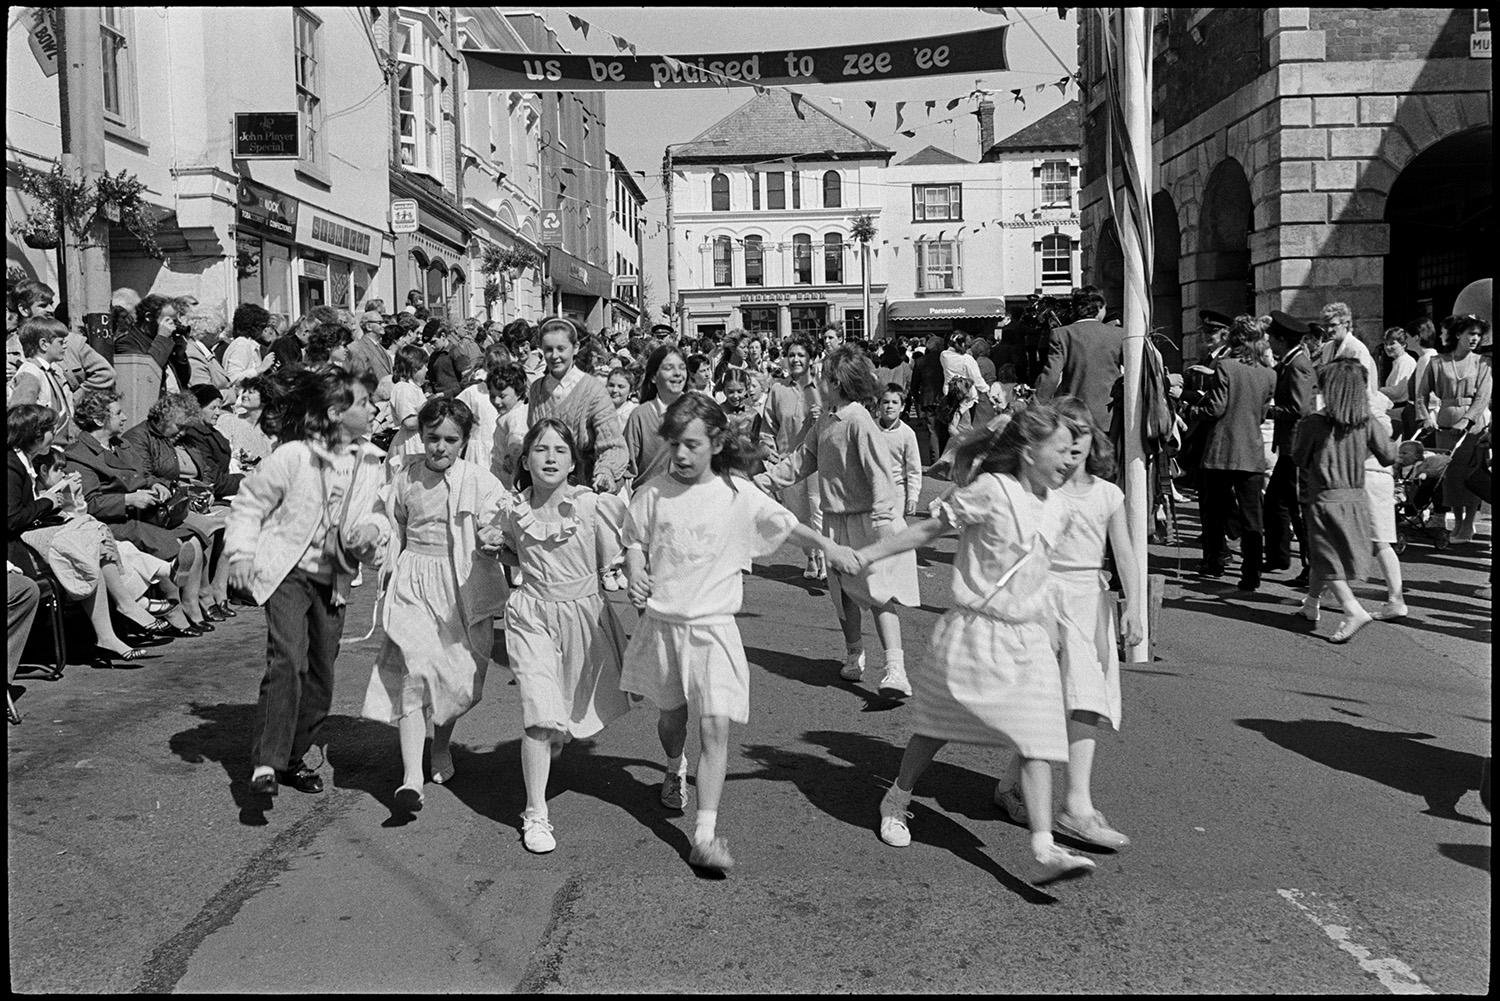 May Fair. Dancing with band marching, spectators and passers by. Maypole. 
[A group of young girls holding hands in a line dancing in a street outside the Town Hall at Torrington May Fair. Other people are also dancing. Spectators are watching from the side of the street and a maypole is visible in the foreground. The street is decorated with a banner an bunting.]